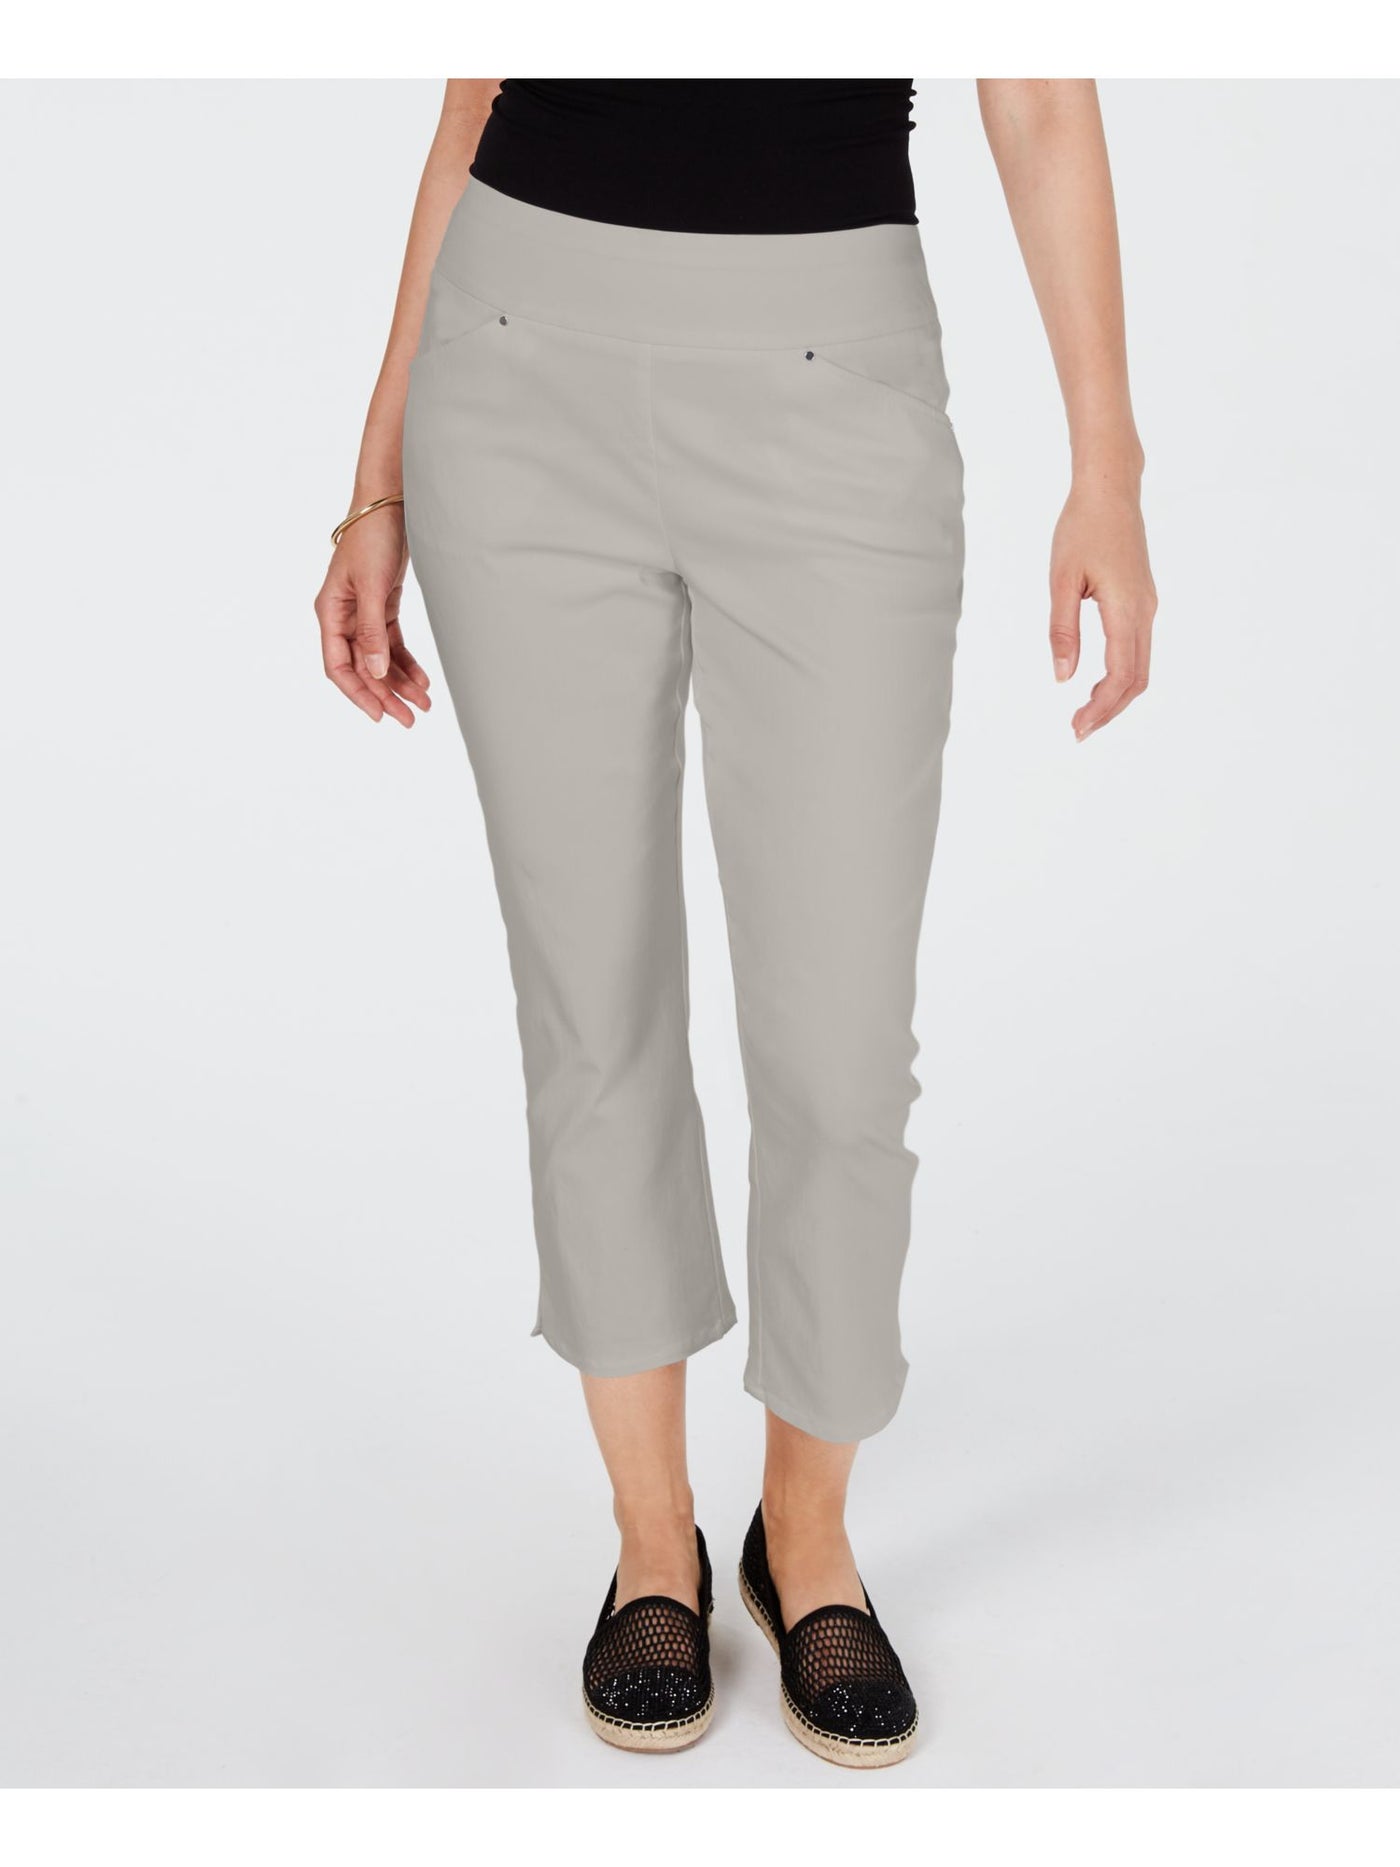 INC Womens Beige Cropped Pants Size: 4